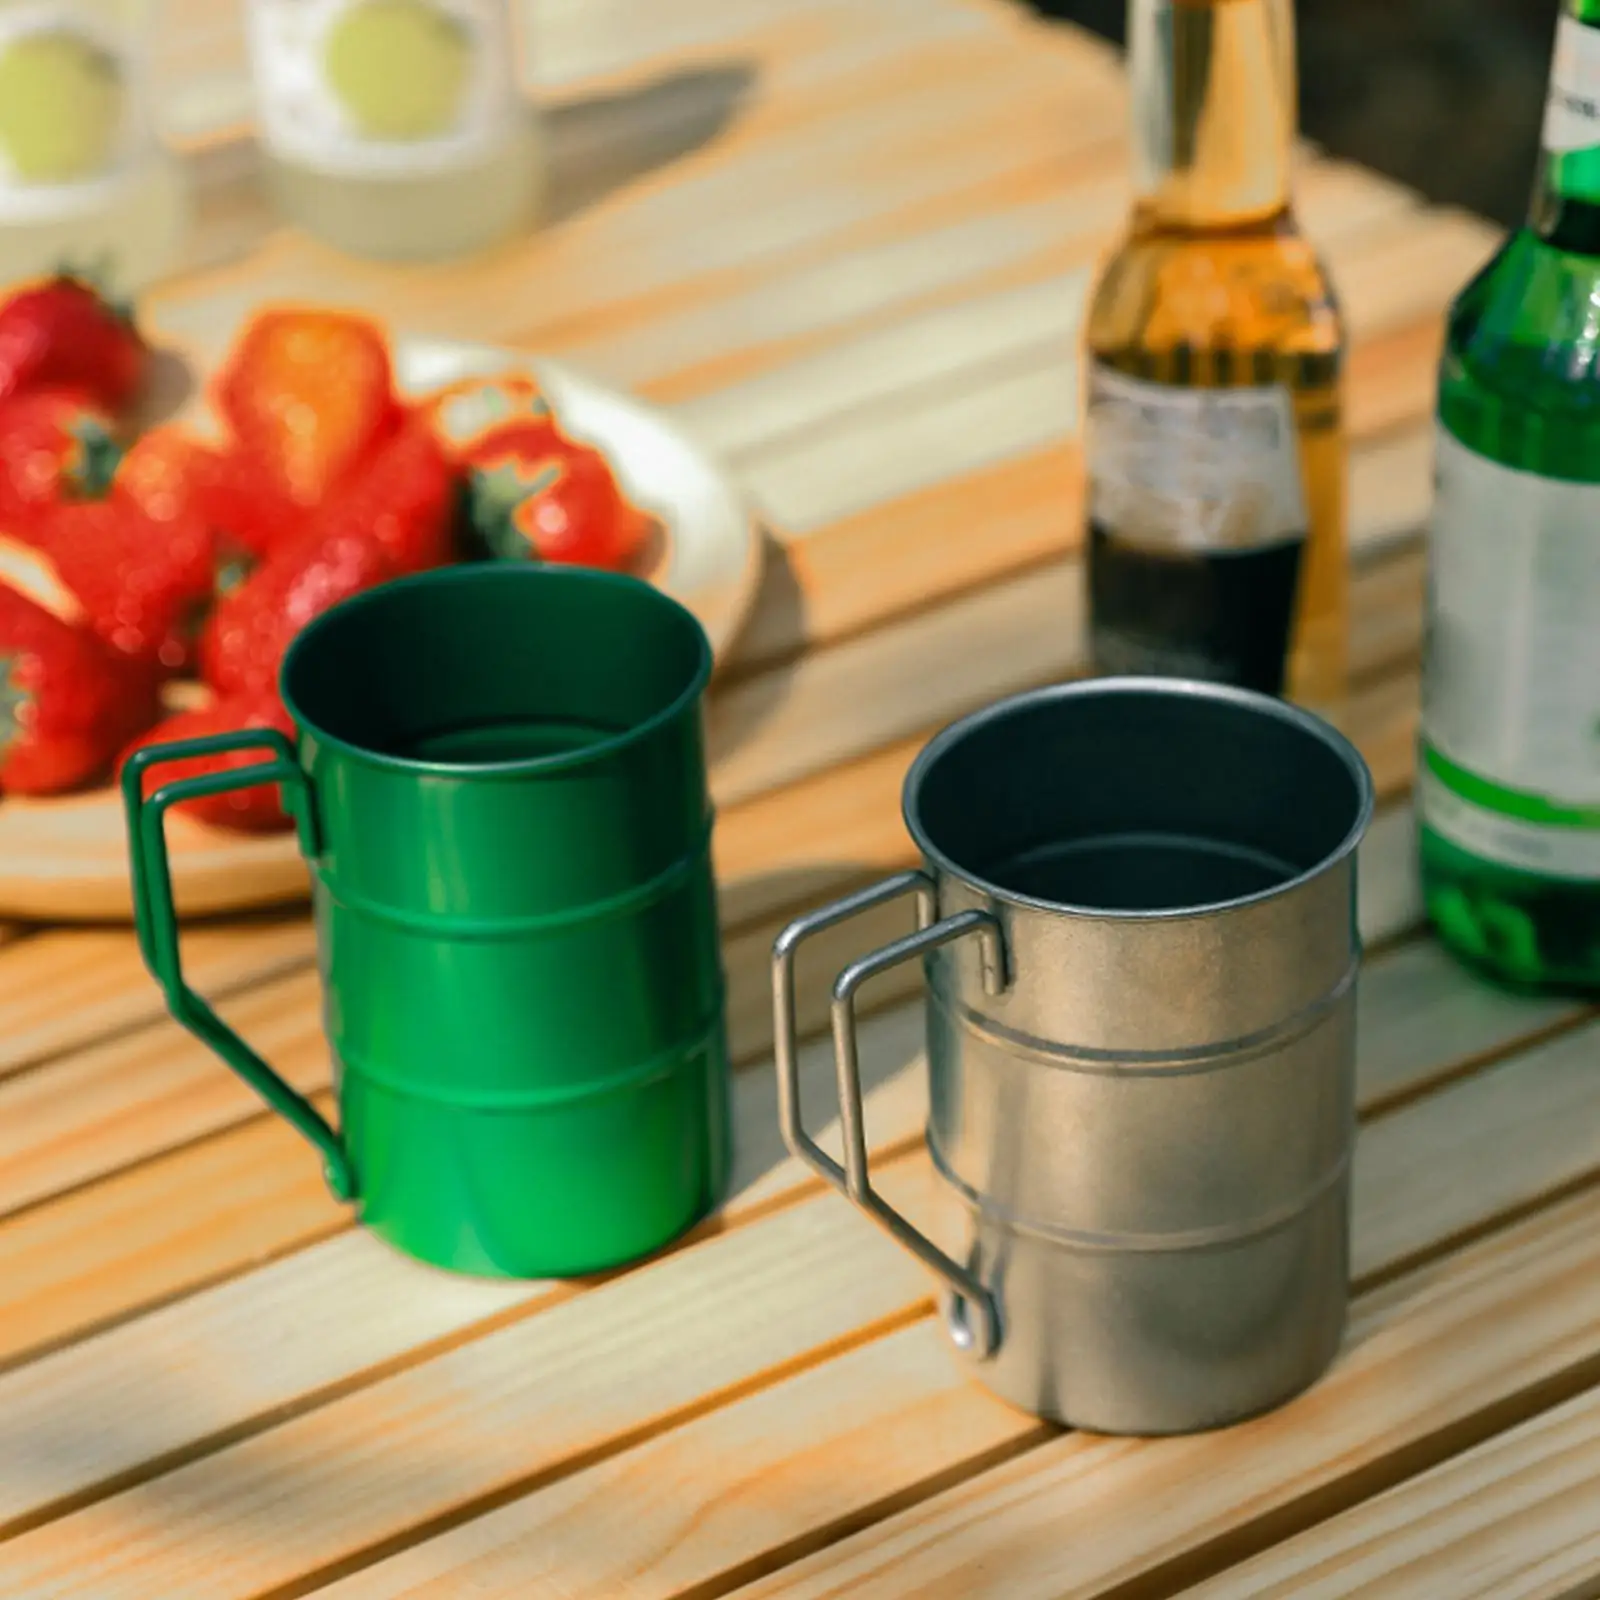 Stainless Steel Camping Mug Cooking Pot Reusable Coffee Cup Gift Vintage Style Beer Mug for Travel Hiking Picnic Outdoor Garden